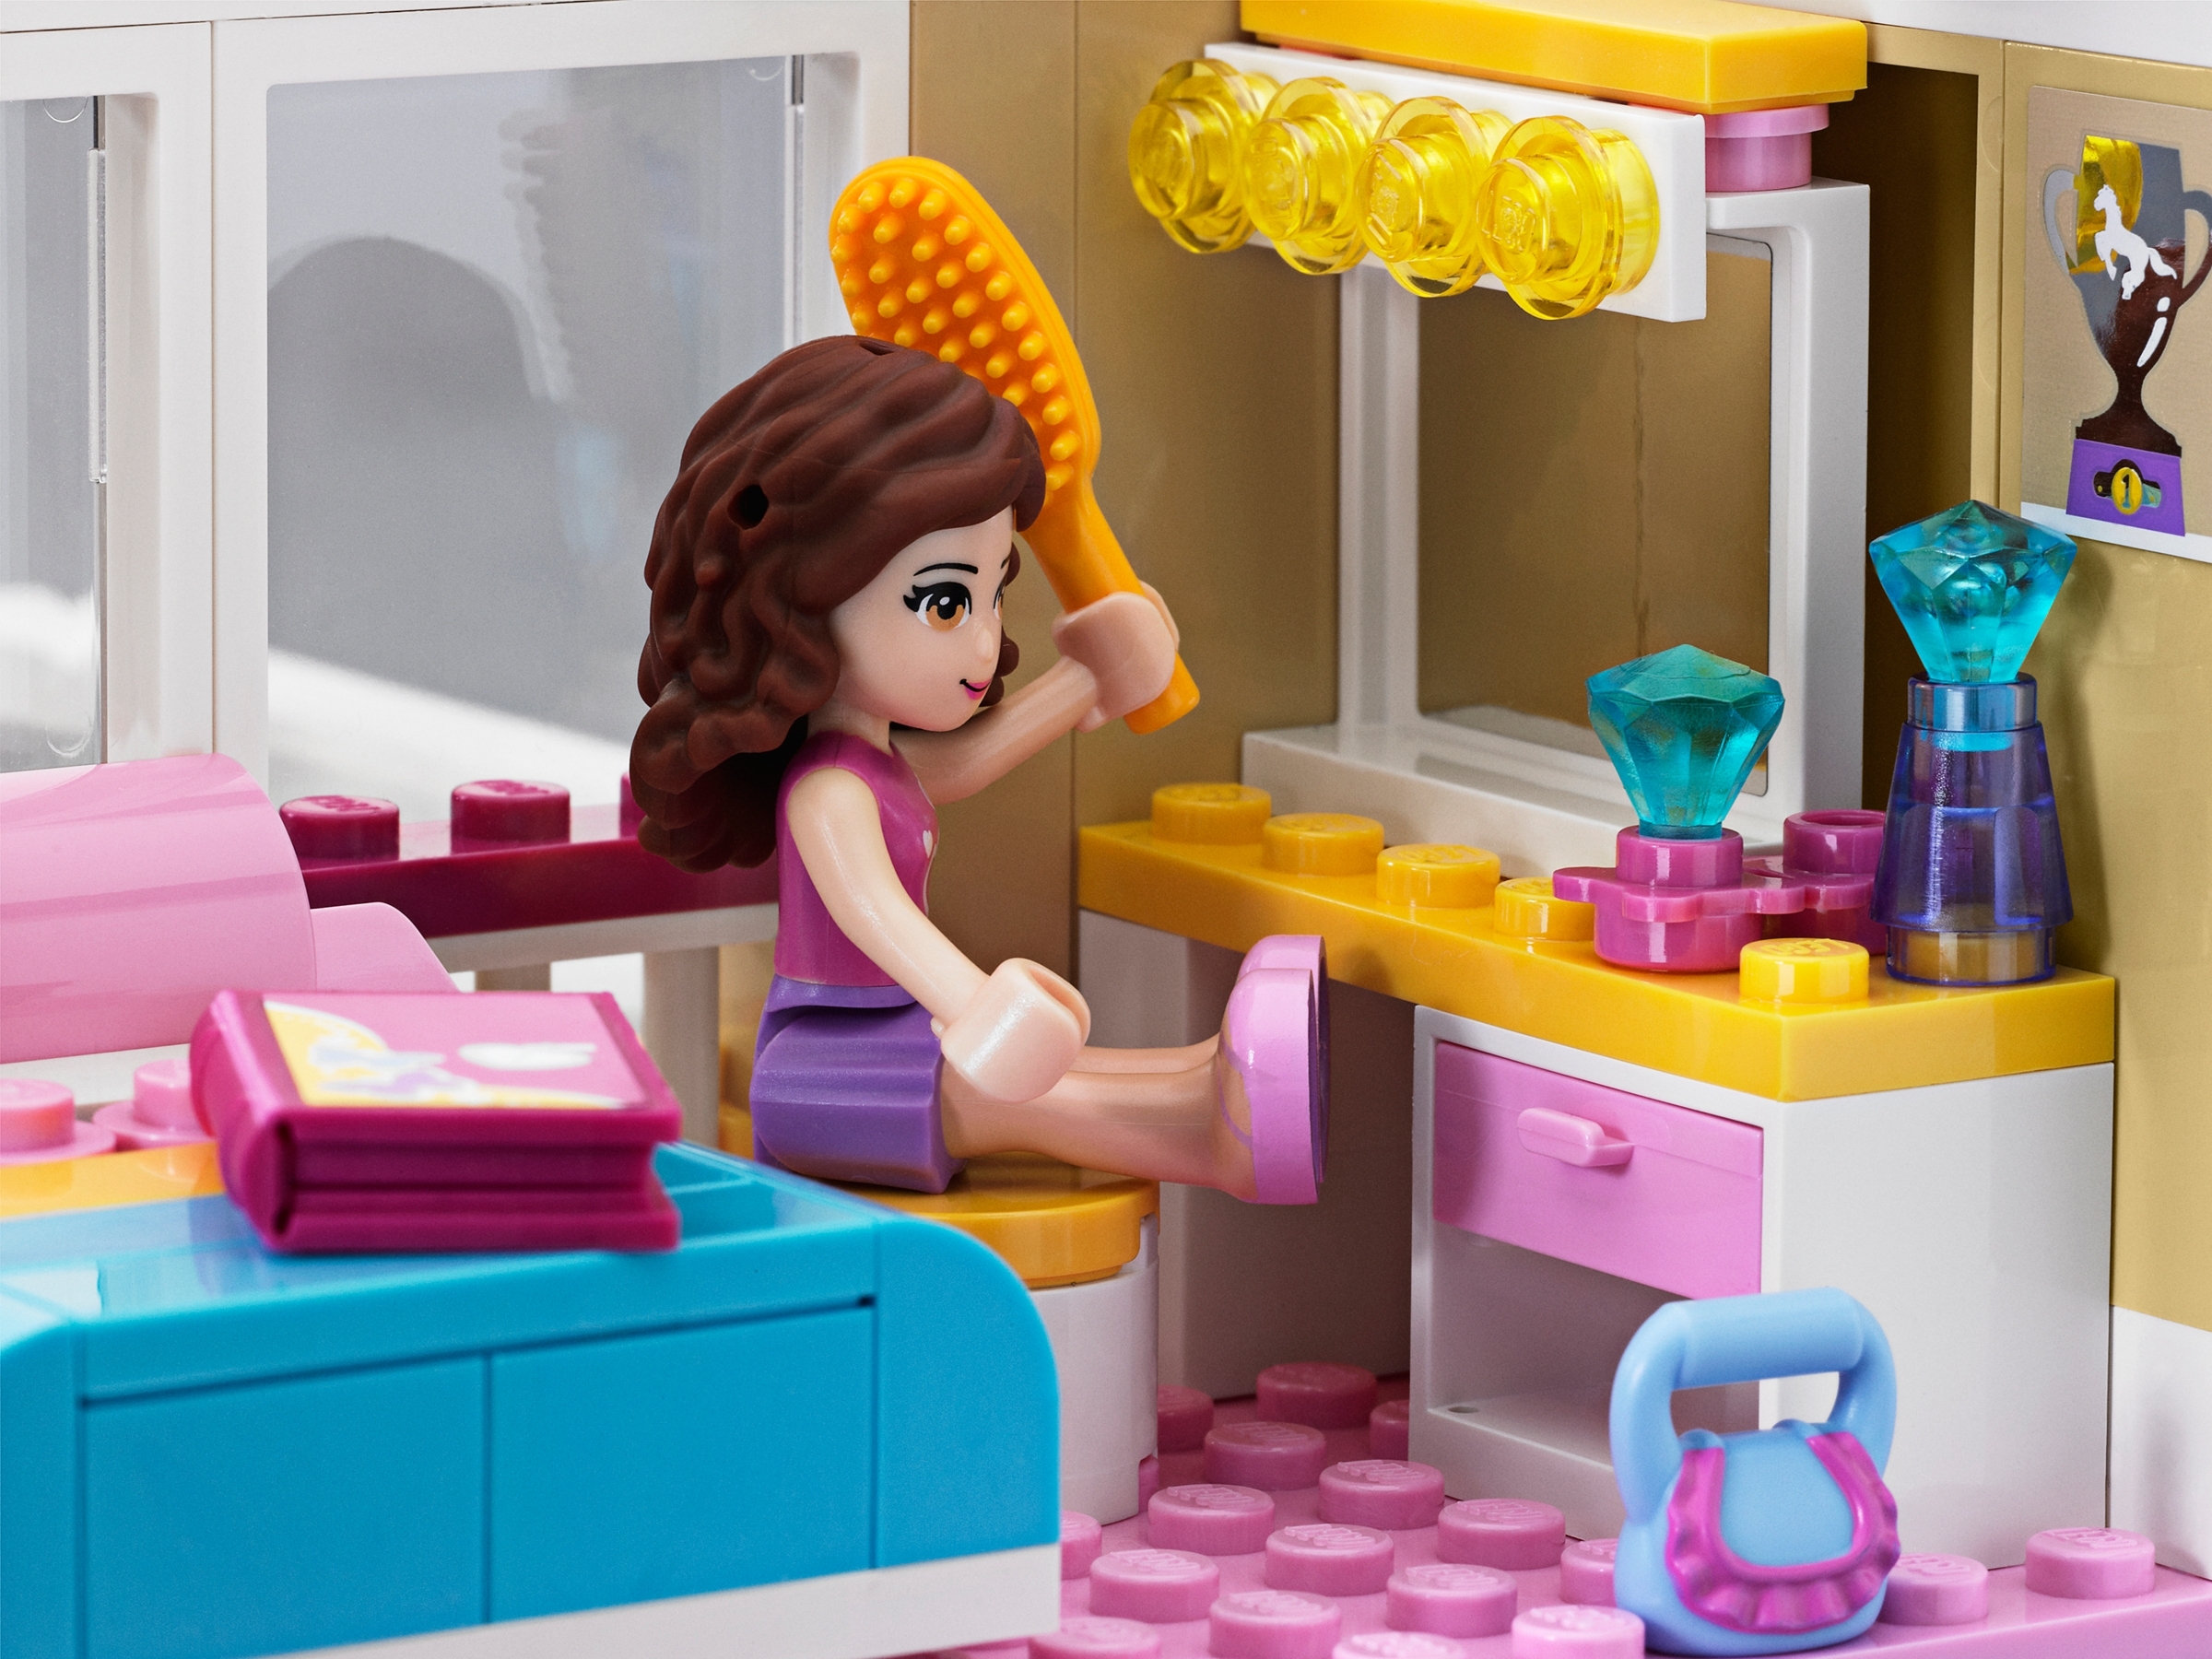 LEGO ® FRIENDS 3315 Olivia's House (Occasion / Stickers 10 / 16)